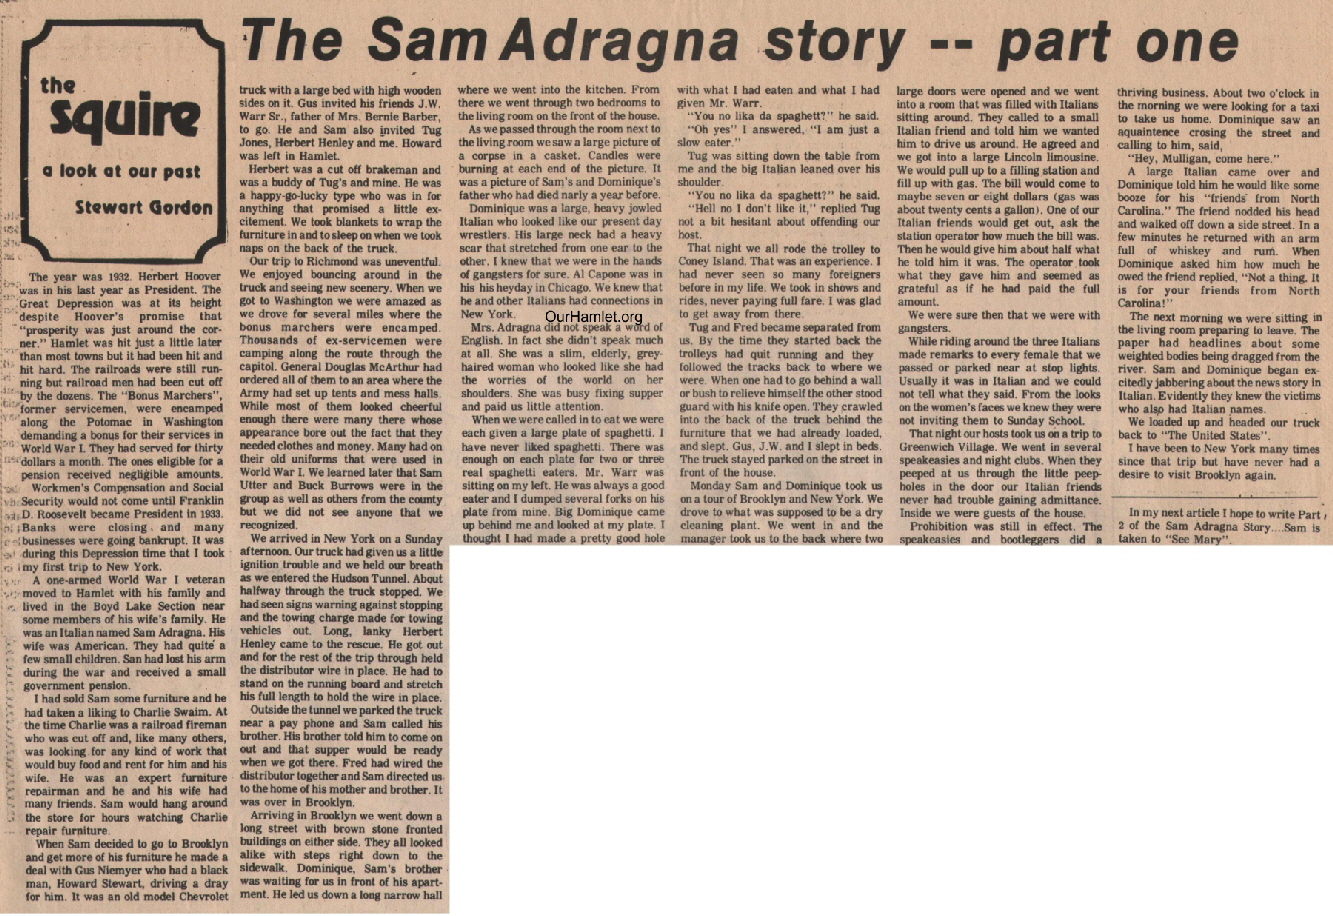 The Squire - Sam Adragna Story Part 1 OH